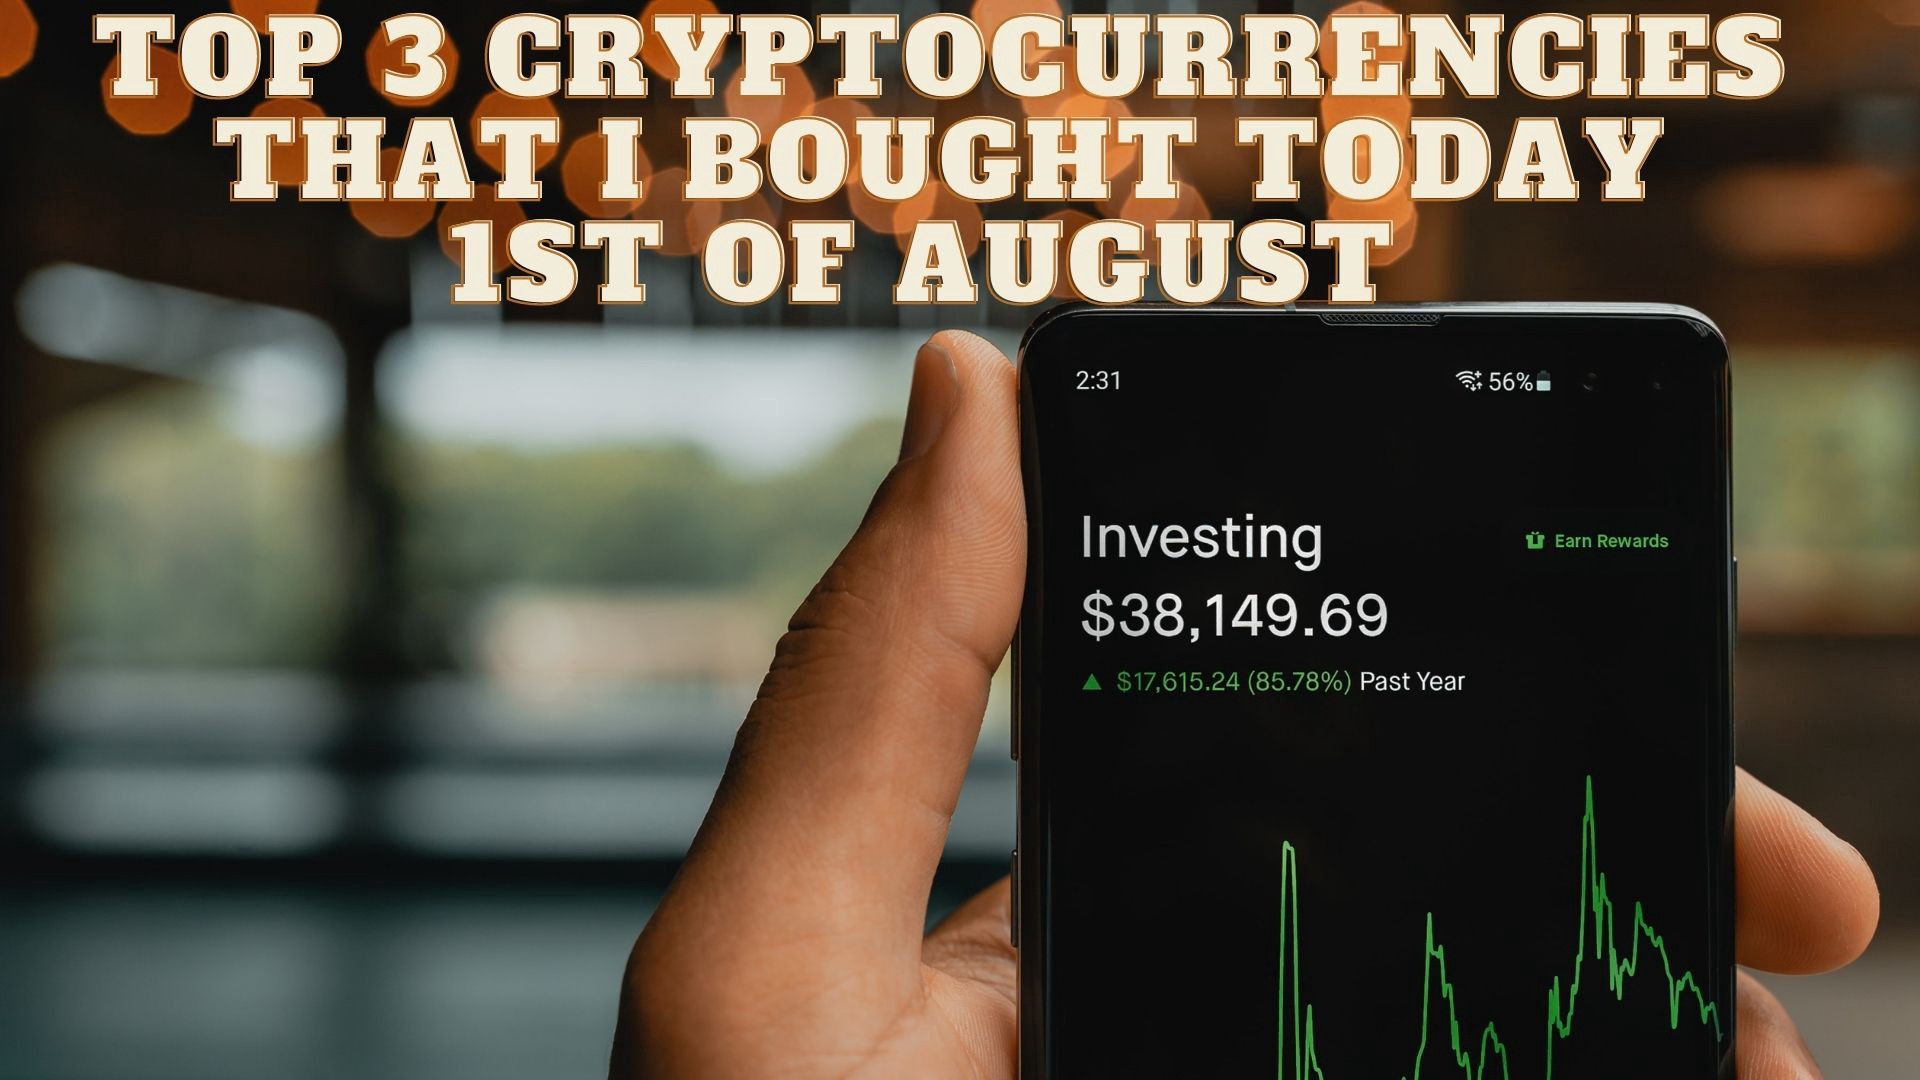 Top 3 Cryptocurrencies that I bought today 1st of August